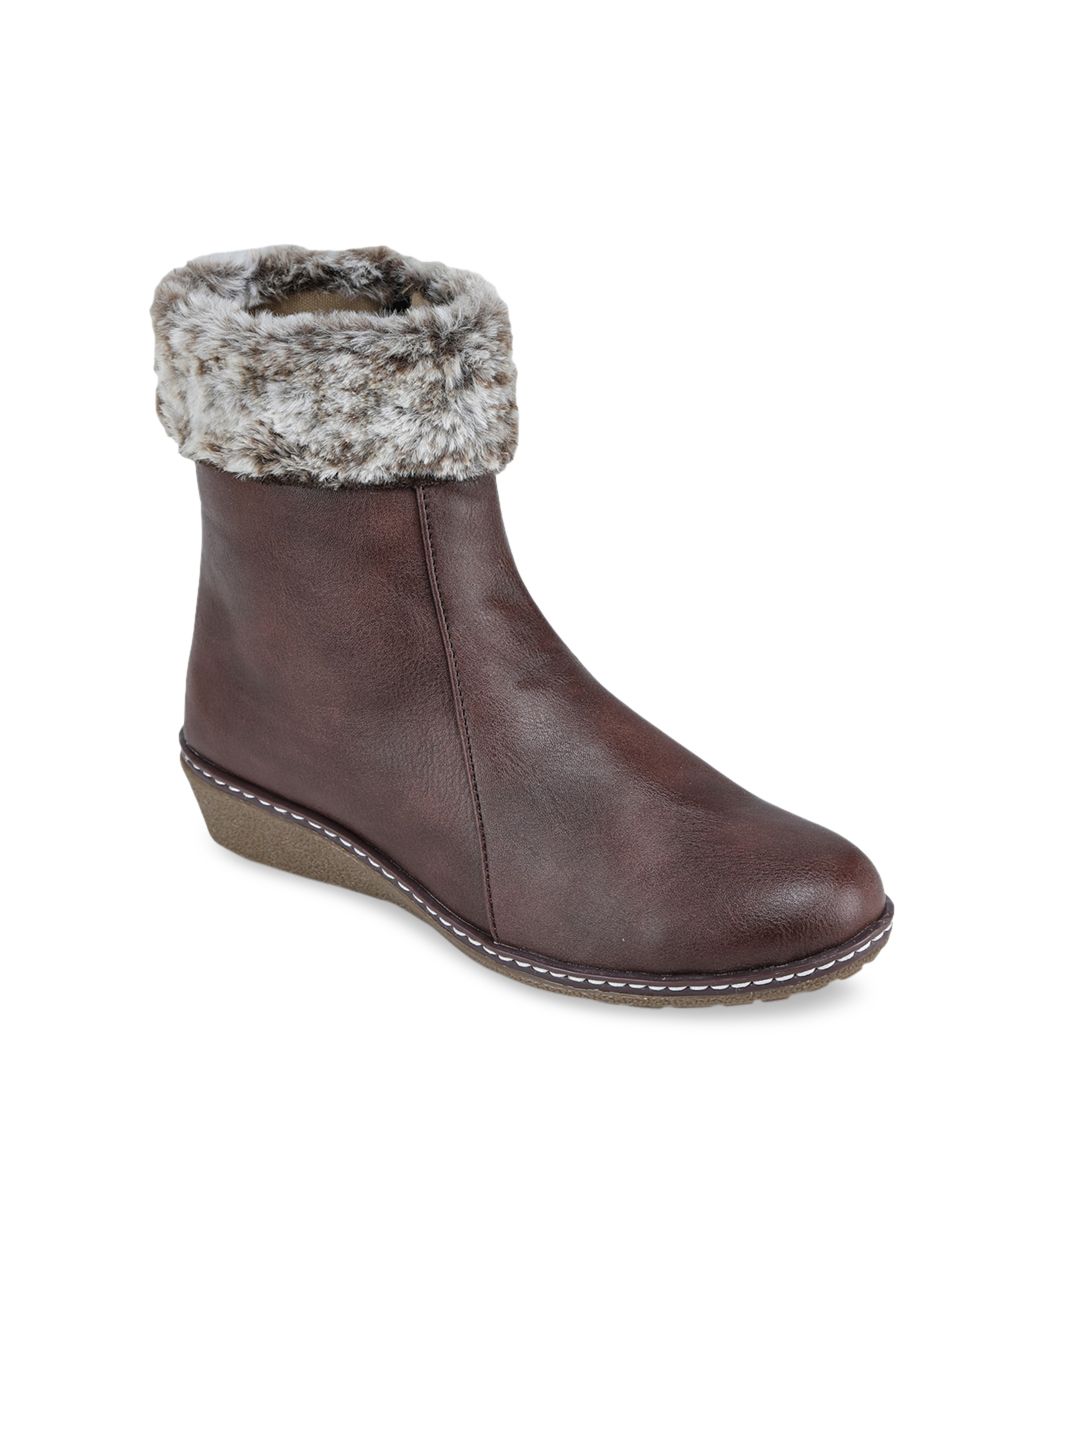 TRASE Women Brown Solid Mid-Top Heeled Boots Price in India